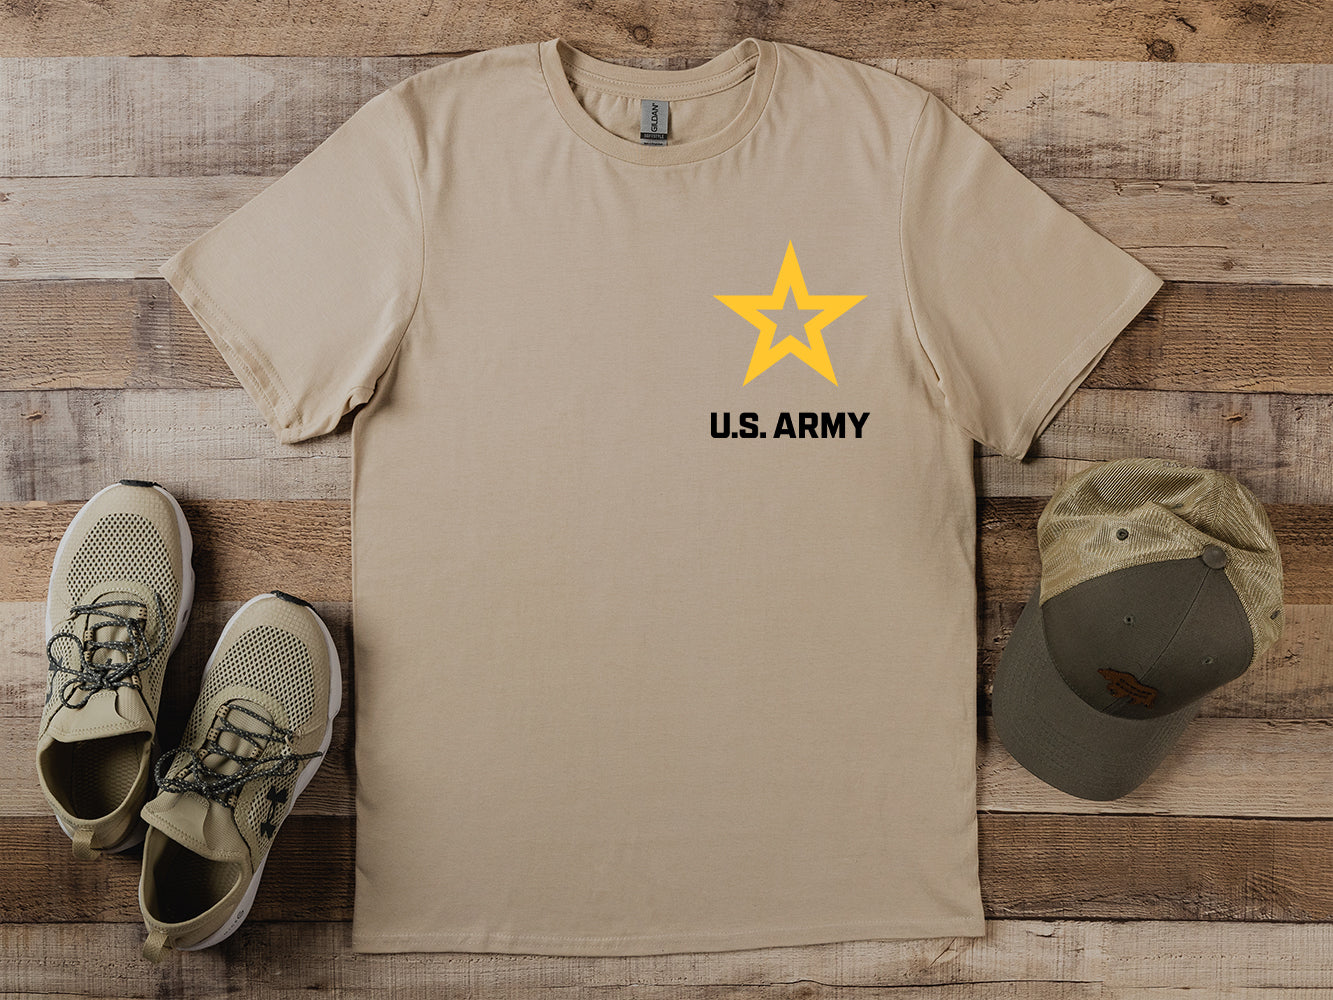 Officially Licensed U.S. Army Logo Crest T-shirt